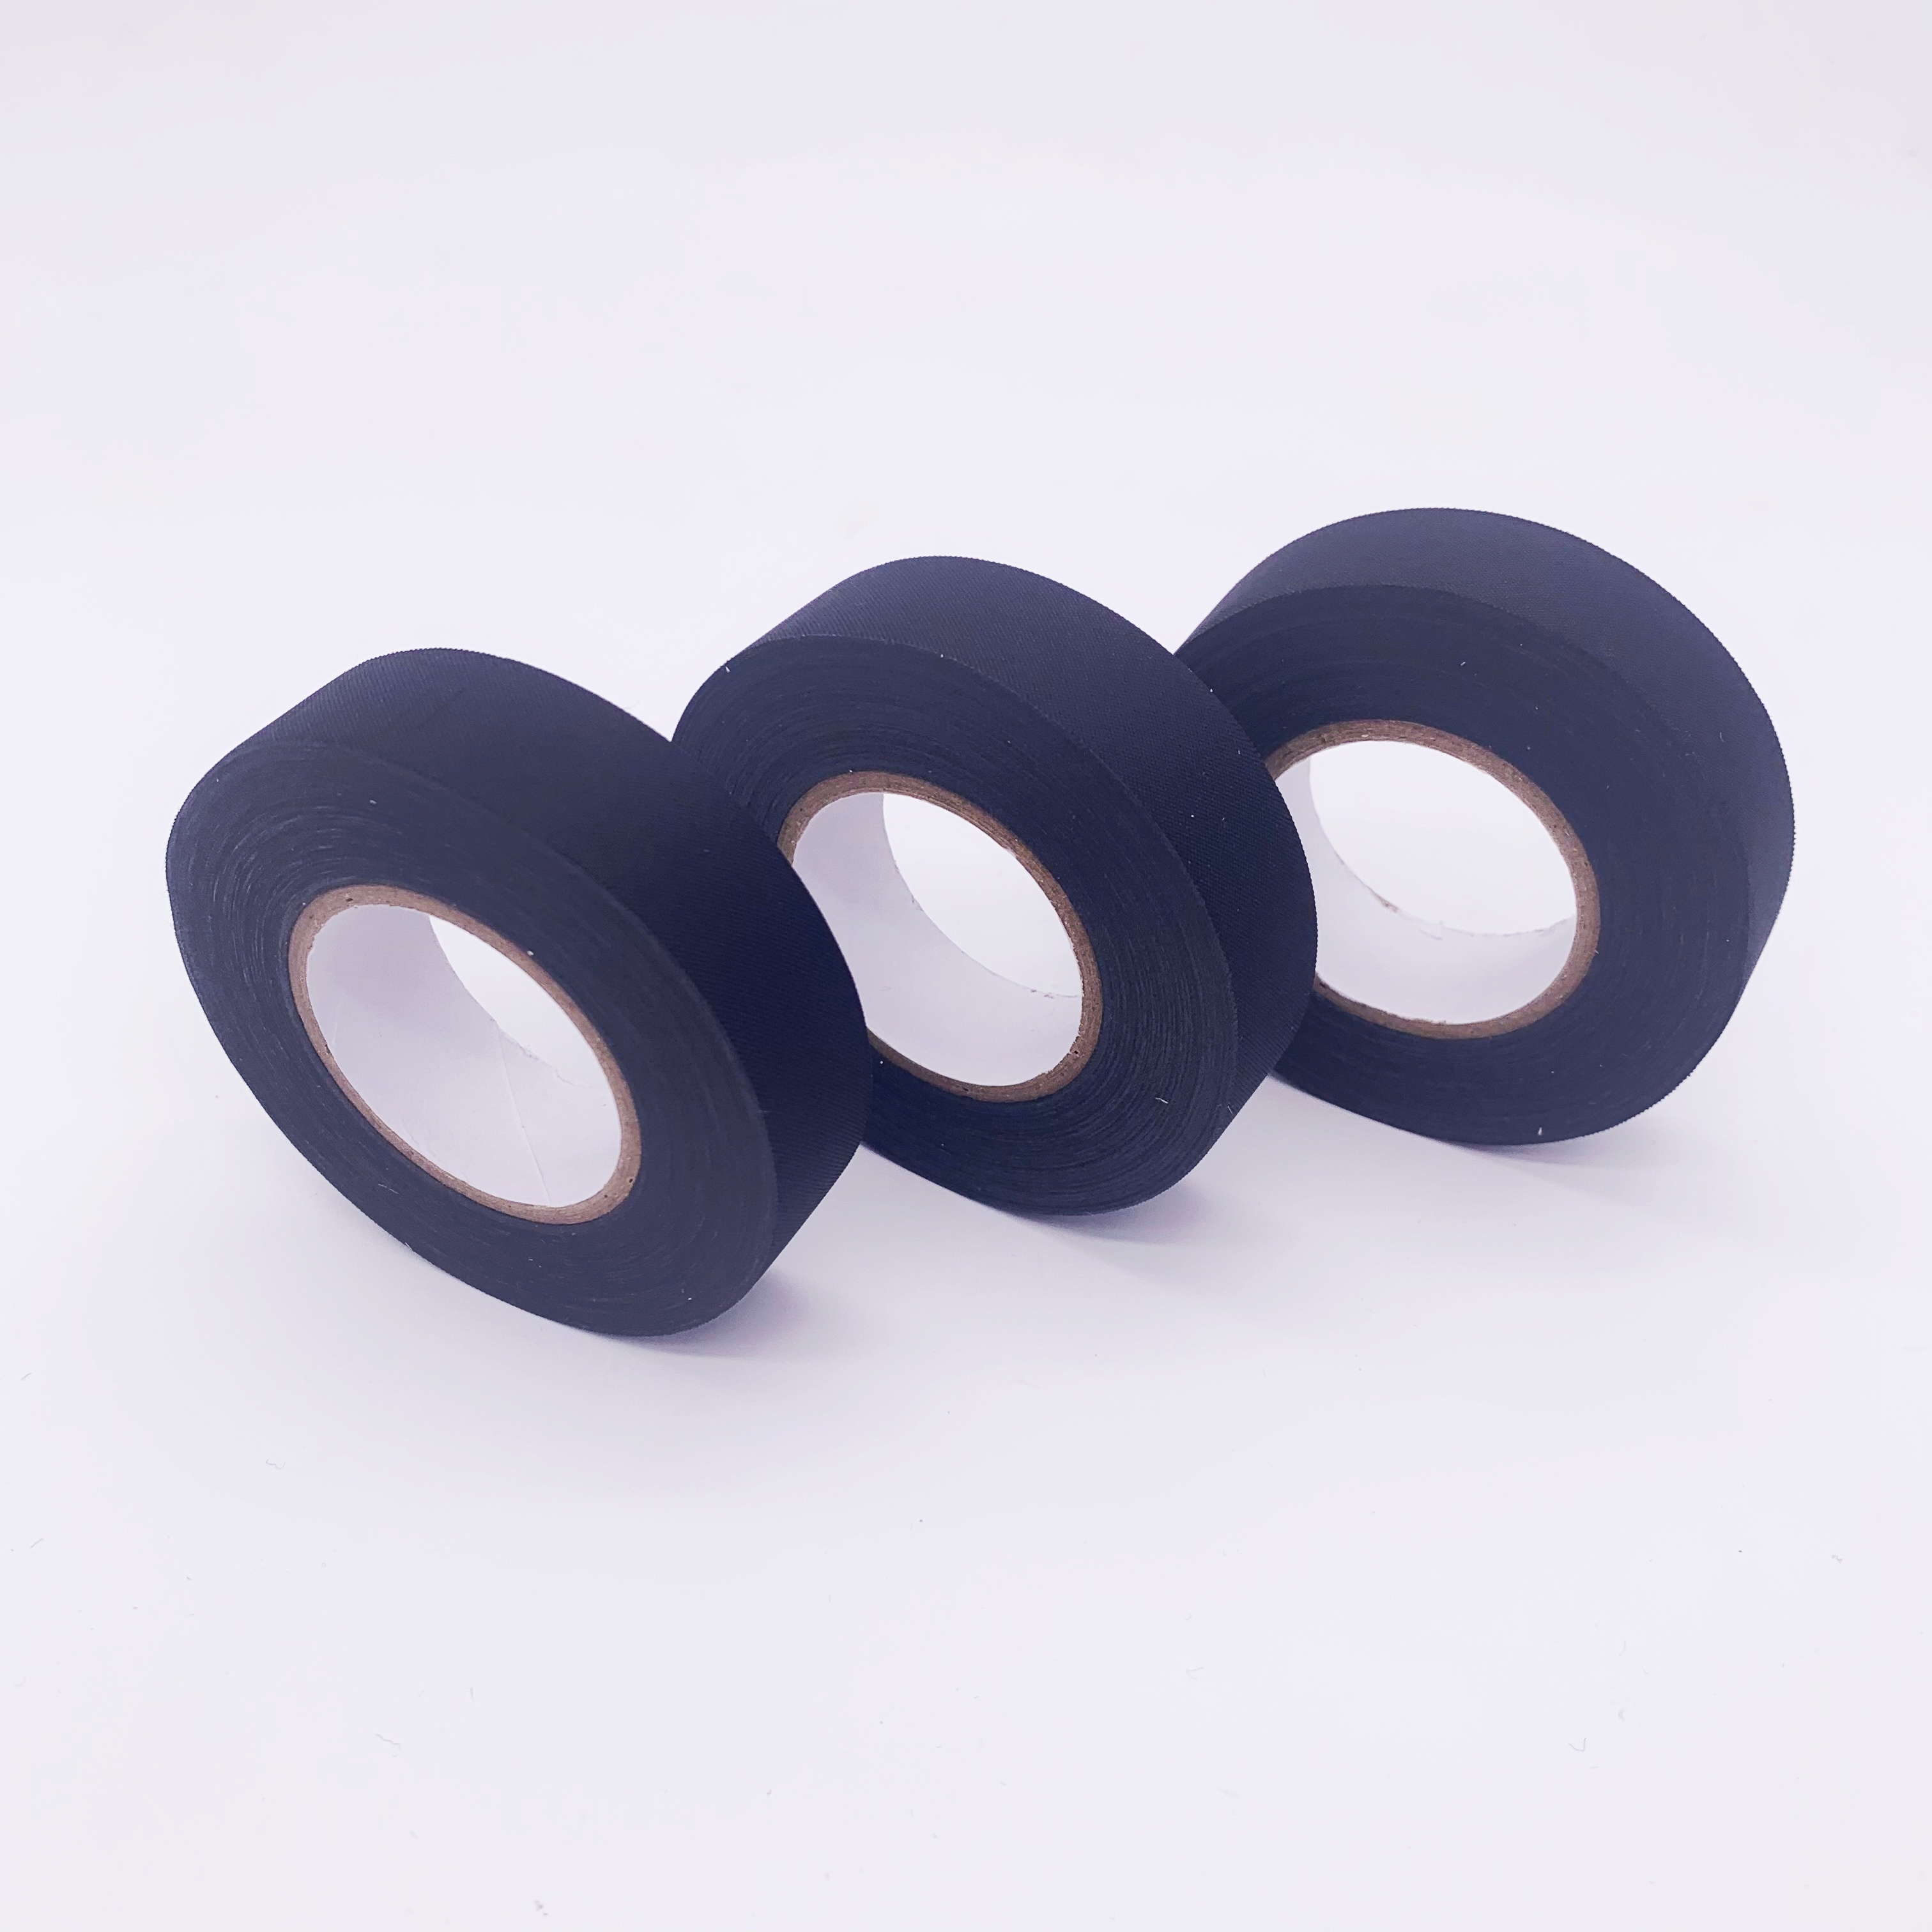 19mm 25mm Black Noise Reduction Adhesive Tape Electrical Maintenance Auto  Car Wiring Harness Strapping Fabric Flannel Cloth Tape